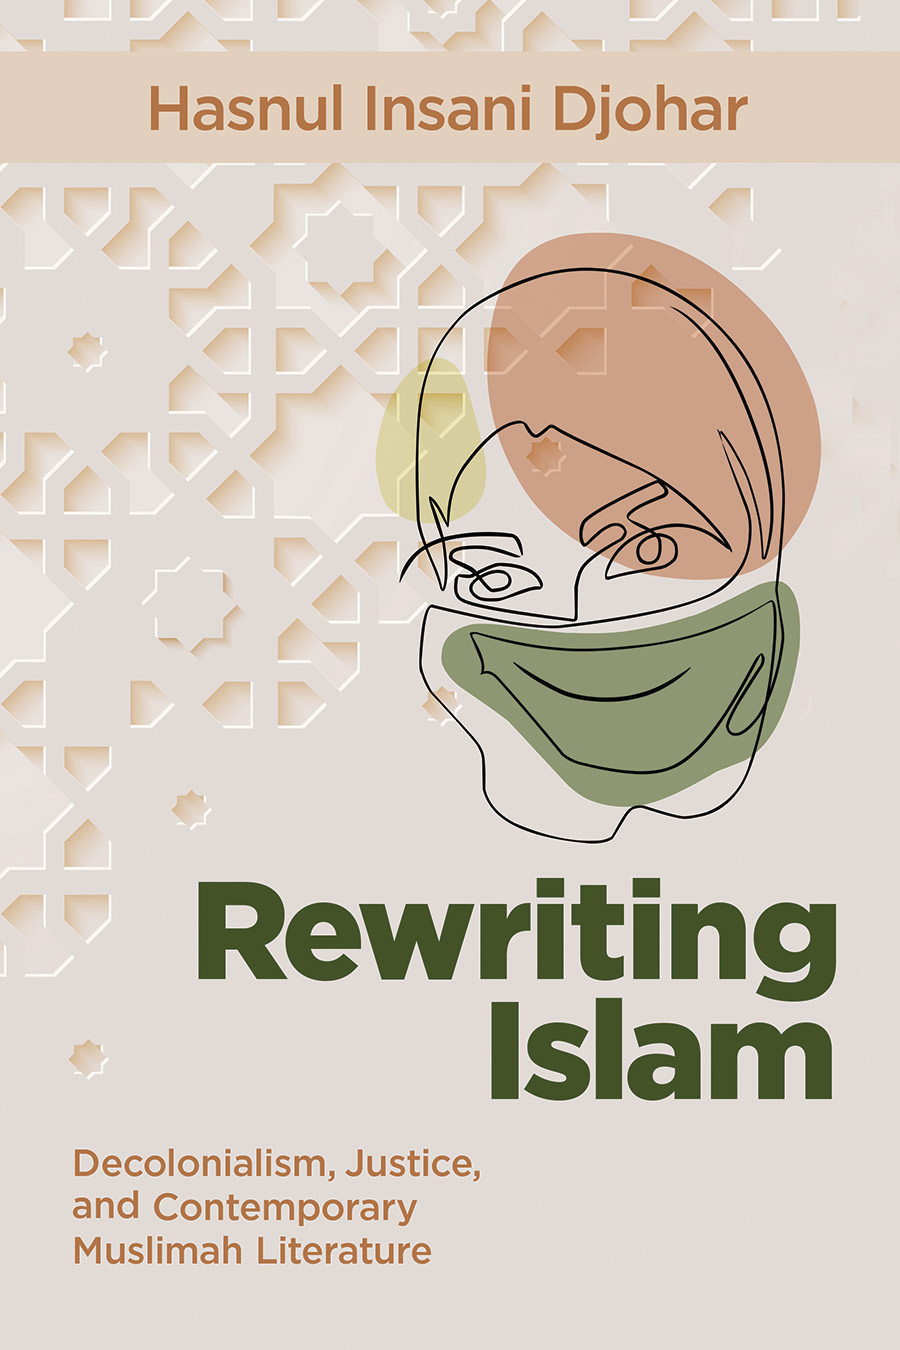 Front cover of Rewriting Islam: Decolonialism, Justice, and Contemporary Muslimah Literature by Hasnul Insani Djohar, featuring a line-drawn outline of the face of a woman wearing a hijab.